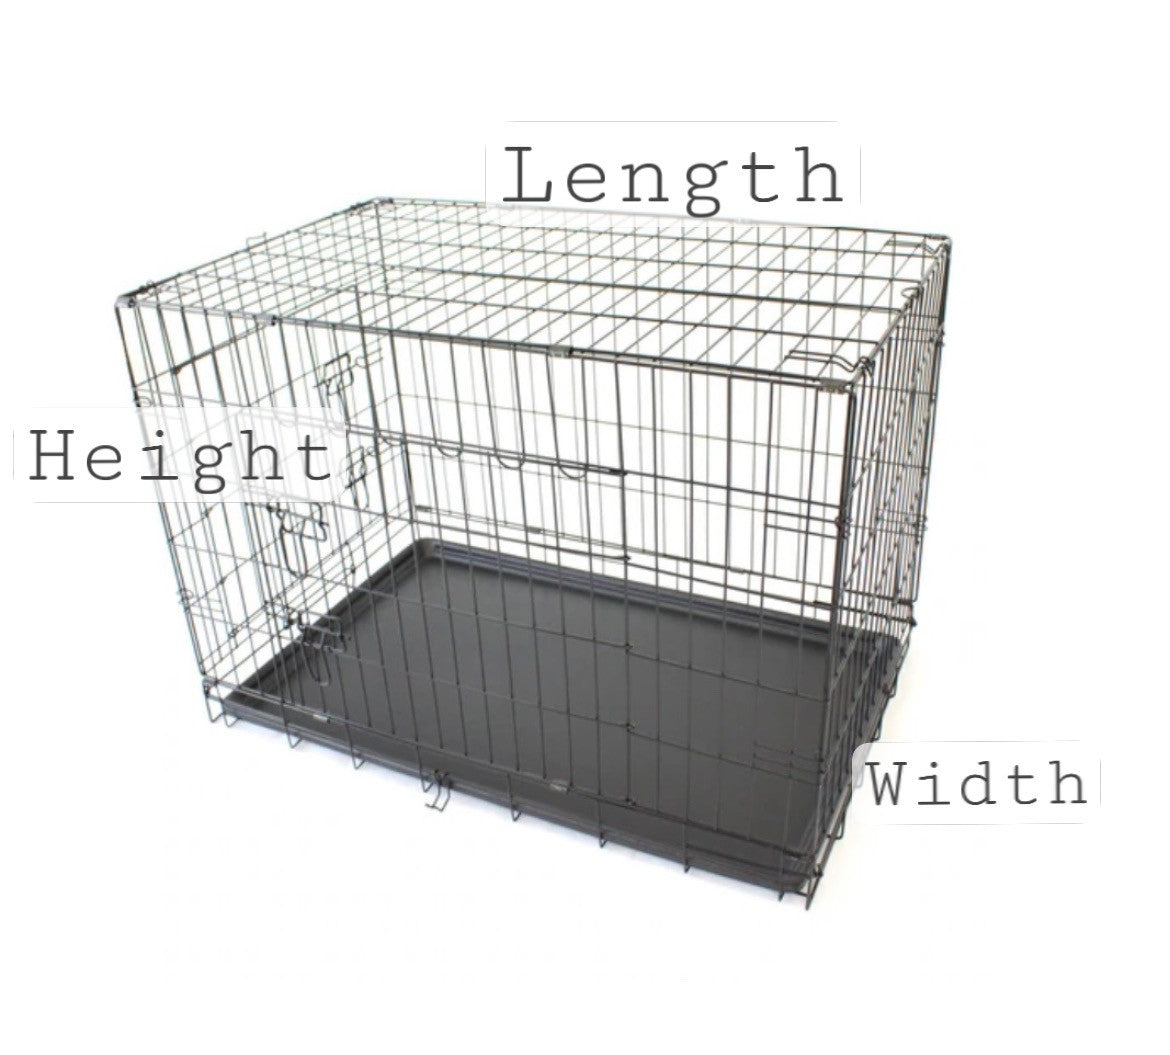 is it safe to put a blanket over a dog crate